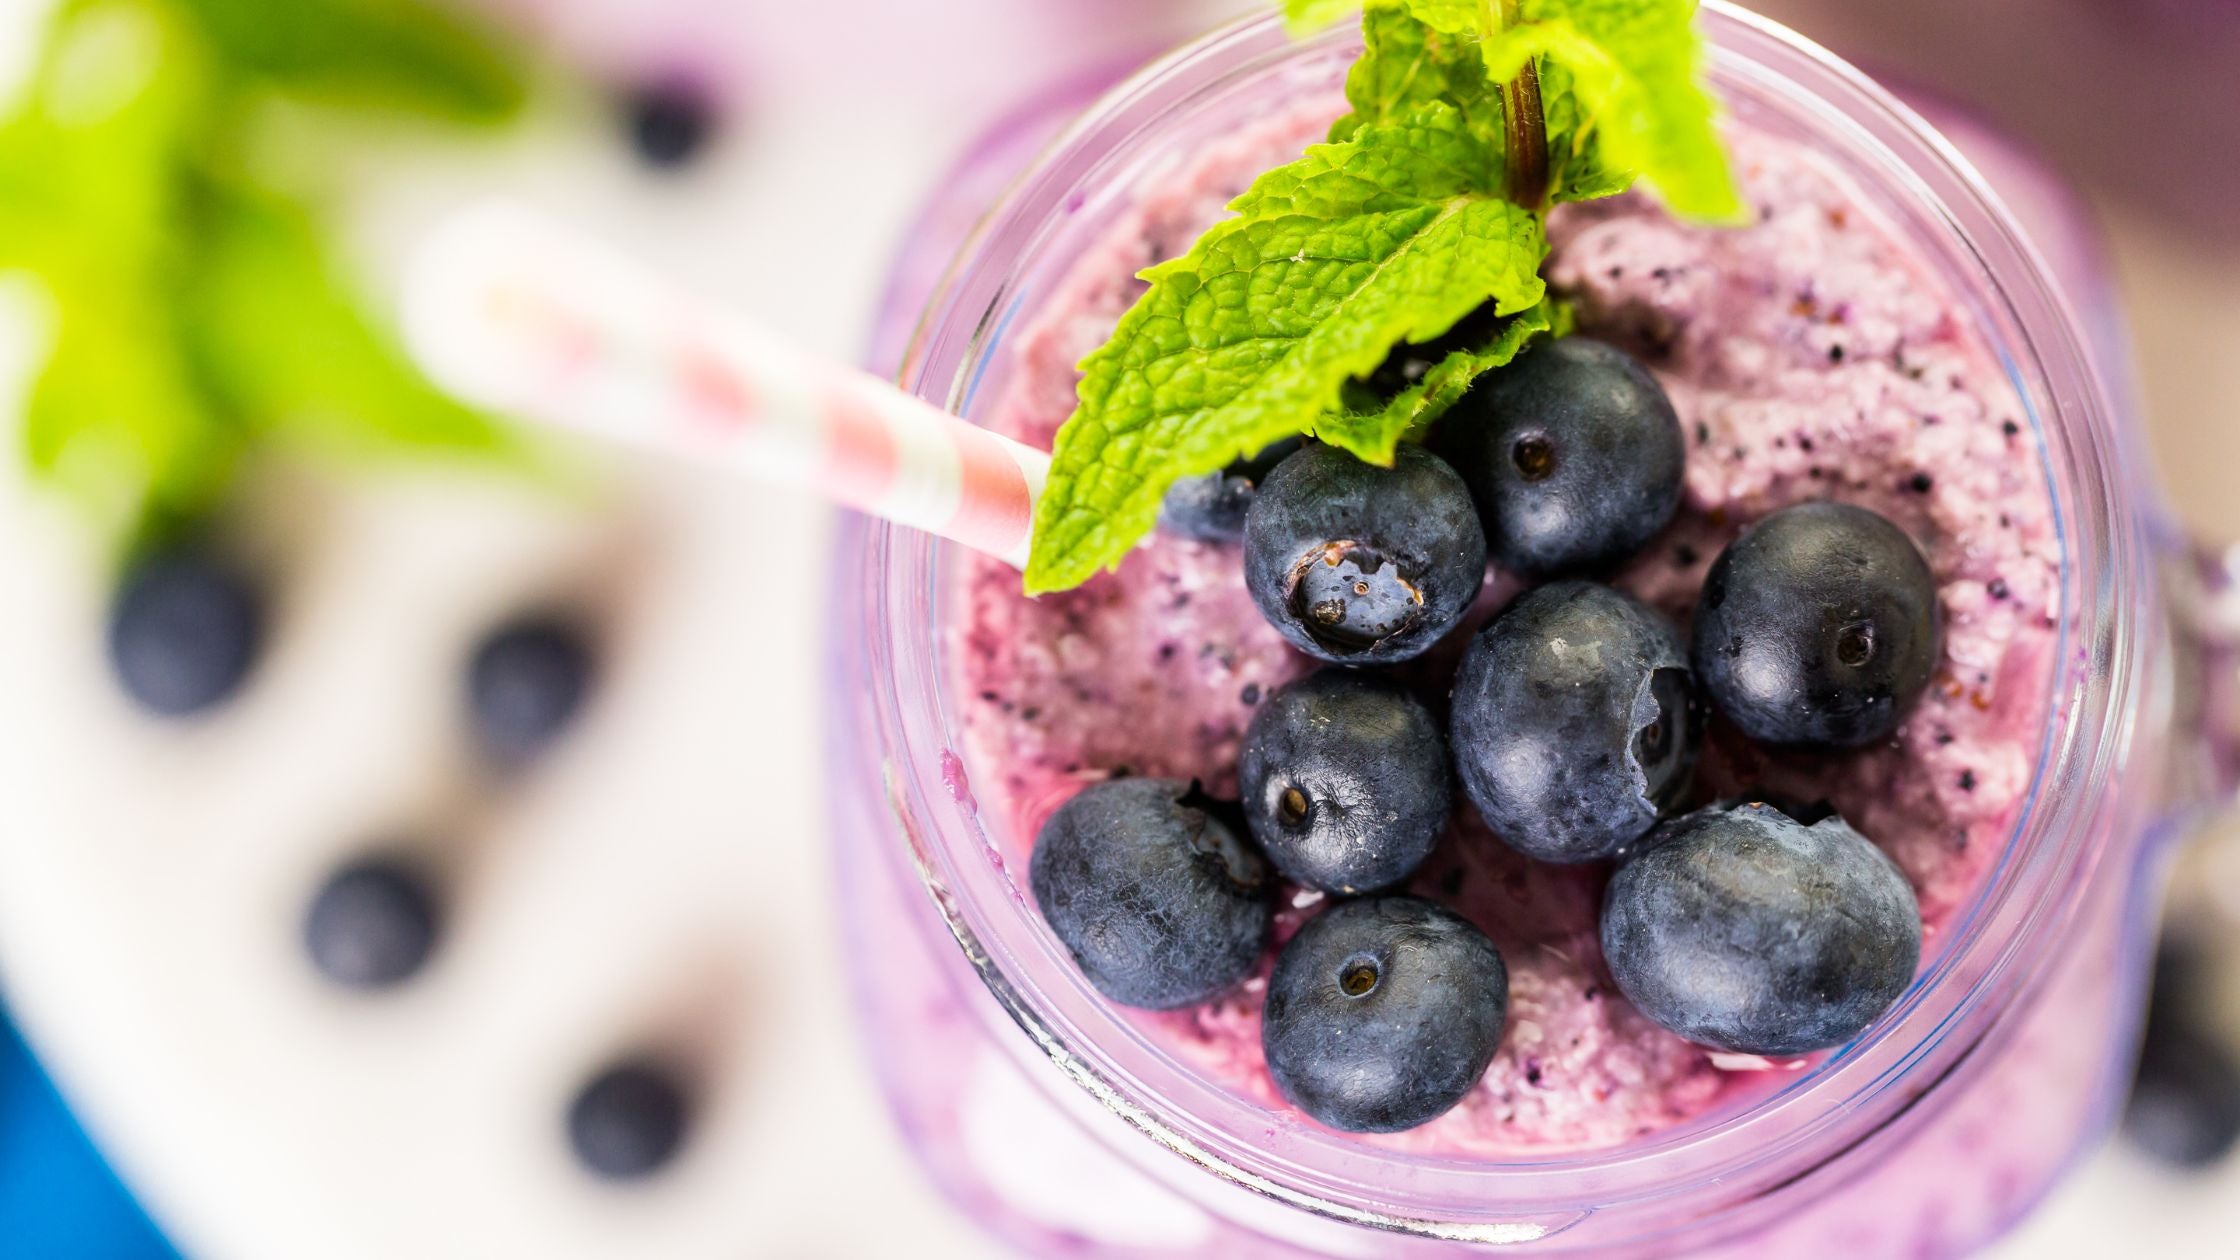 Try our chocolate orange and blueberry smoothie pictured here for a quick meal replacement.